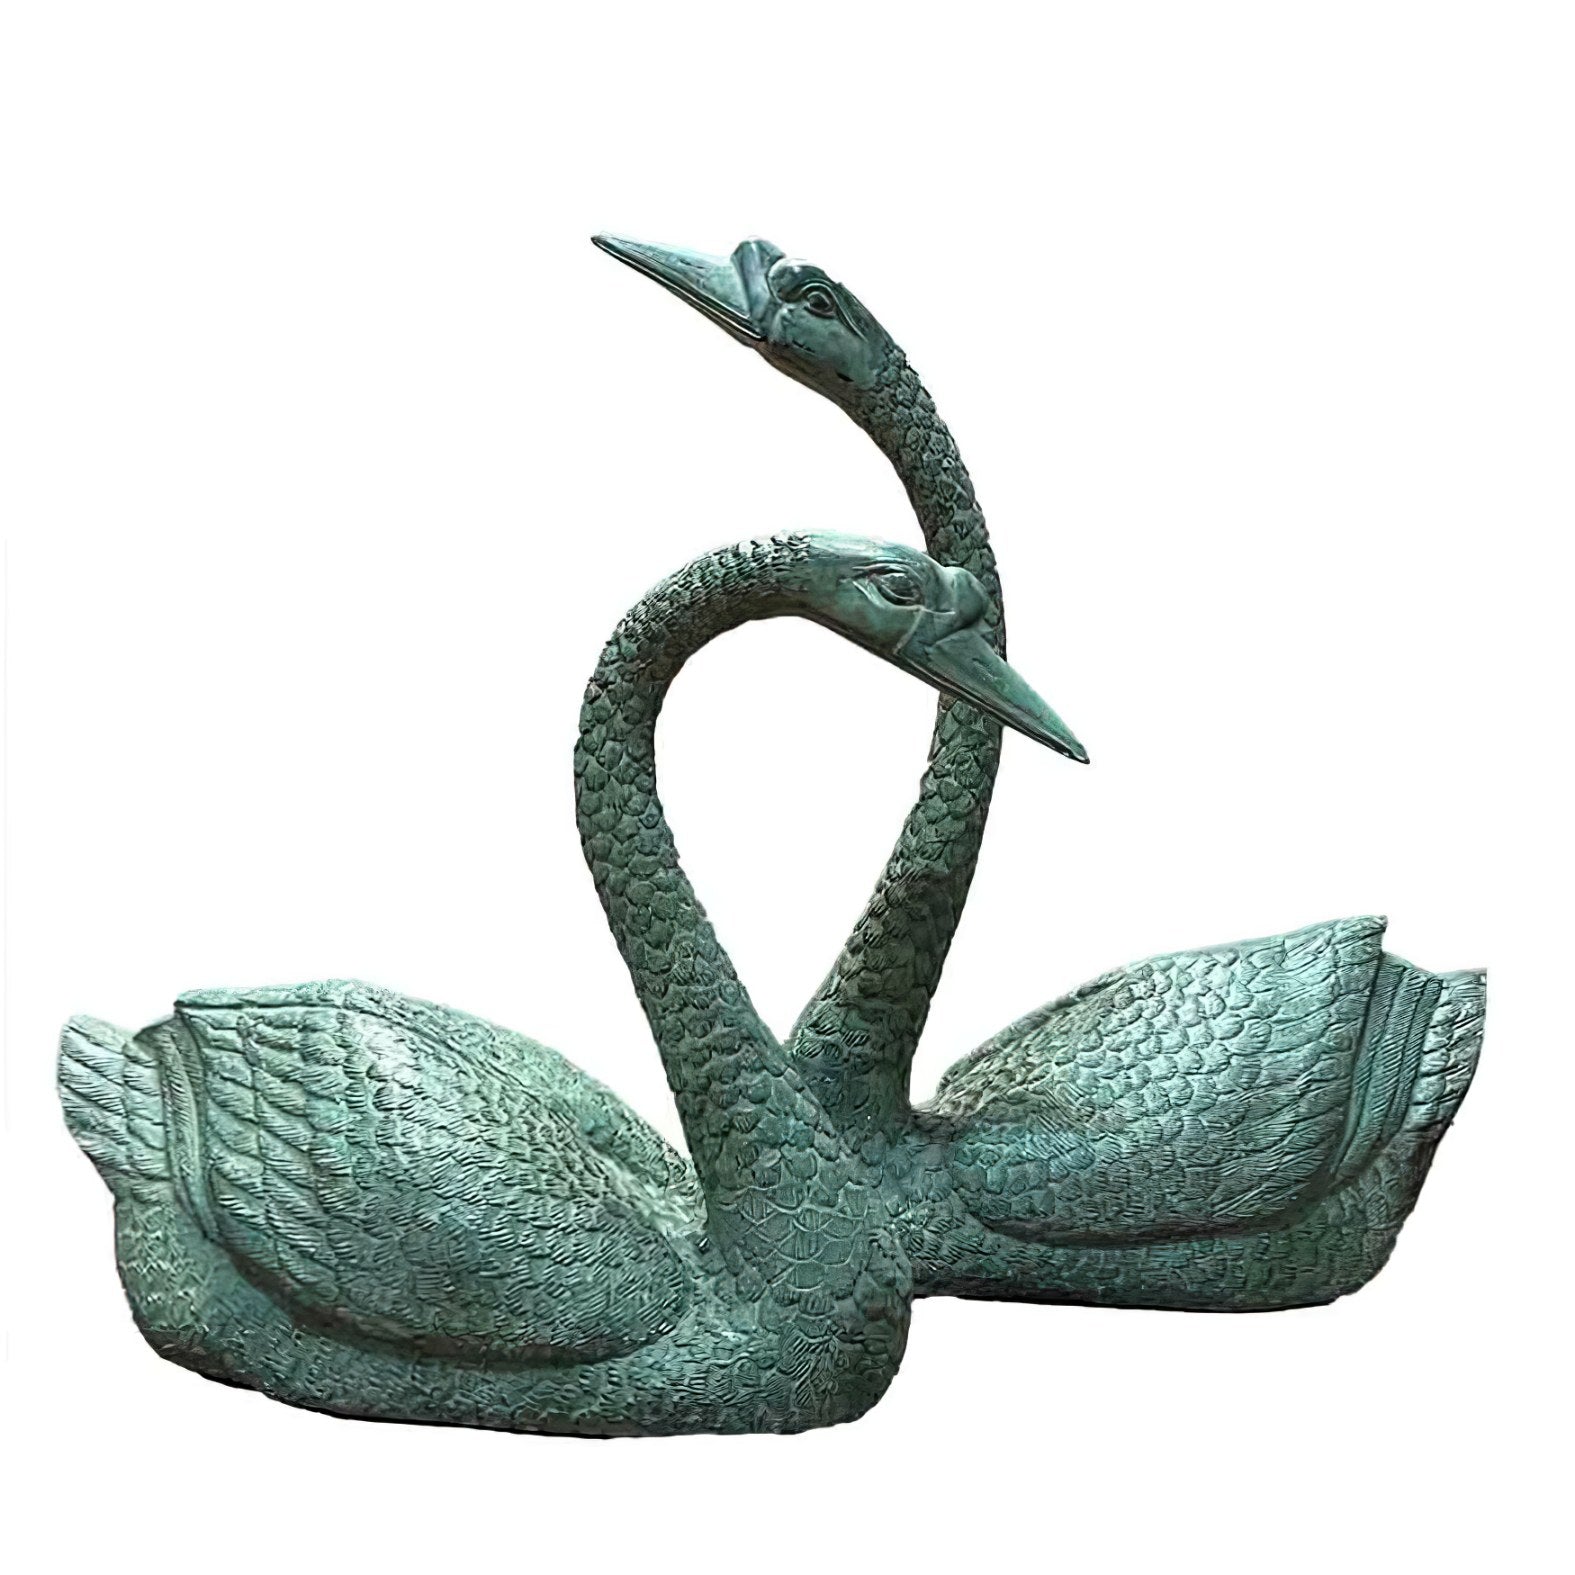 Pair of Sitting Swans Bronze Statues